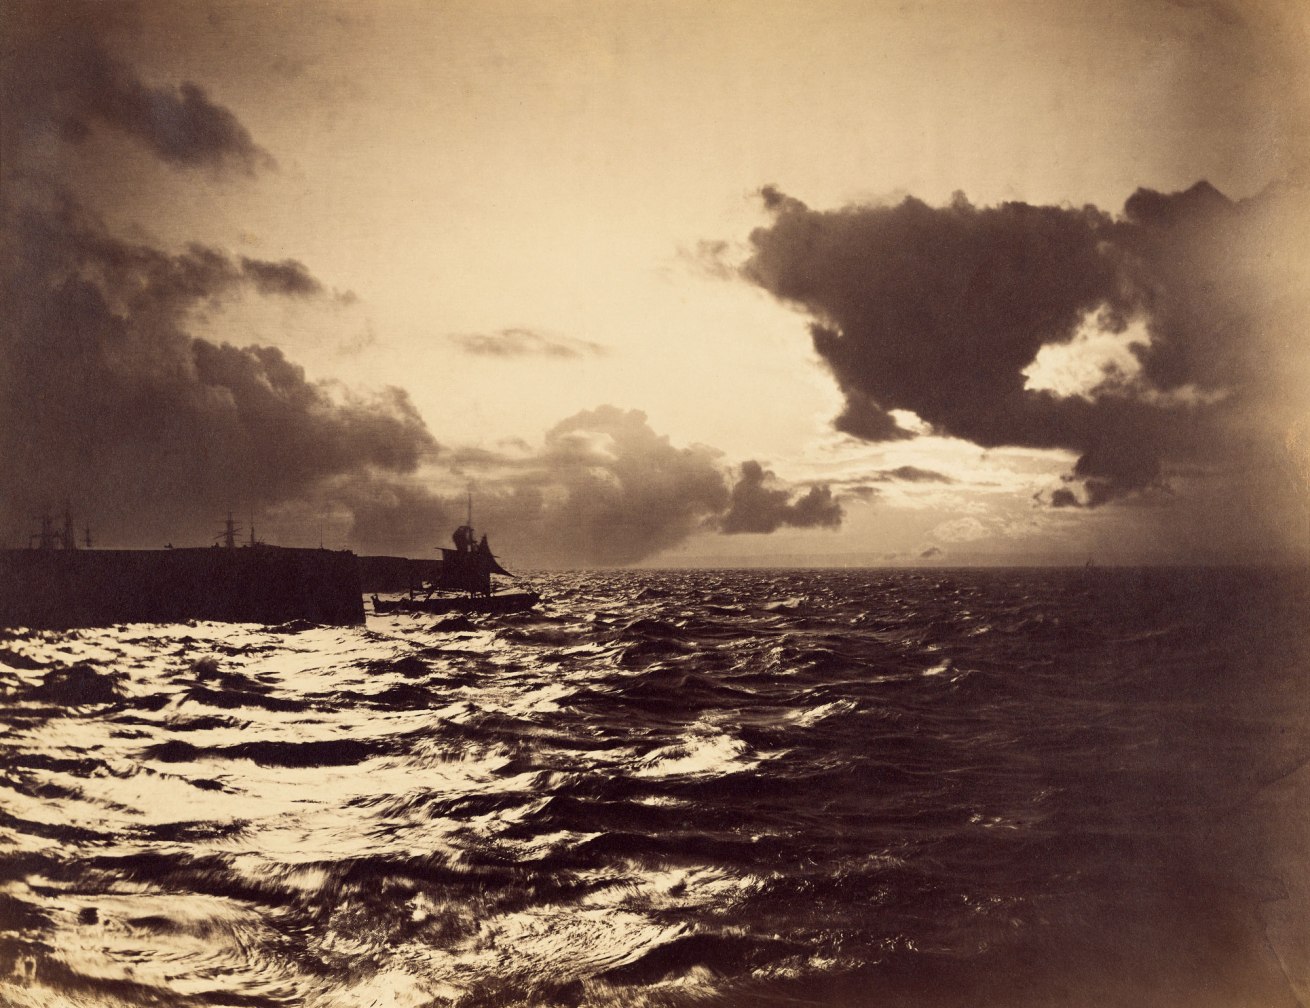 Fotó: Gustave Le Gray (French, 1820-1884)<br />Seascape with a Ship Leaving Port<br />1857<br />Albumen silver print from a glass negative<br />Image: 31.3 x 40.3 cm (12 5/16 x 15 7/8 in.)<br />The J. Paul Getty Museum, Los Angeles